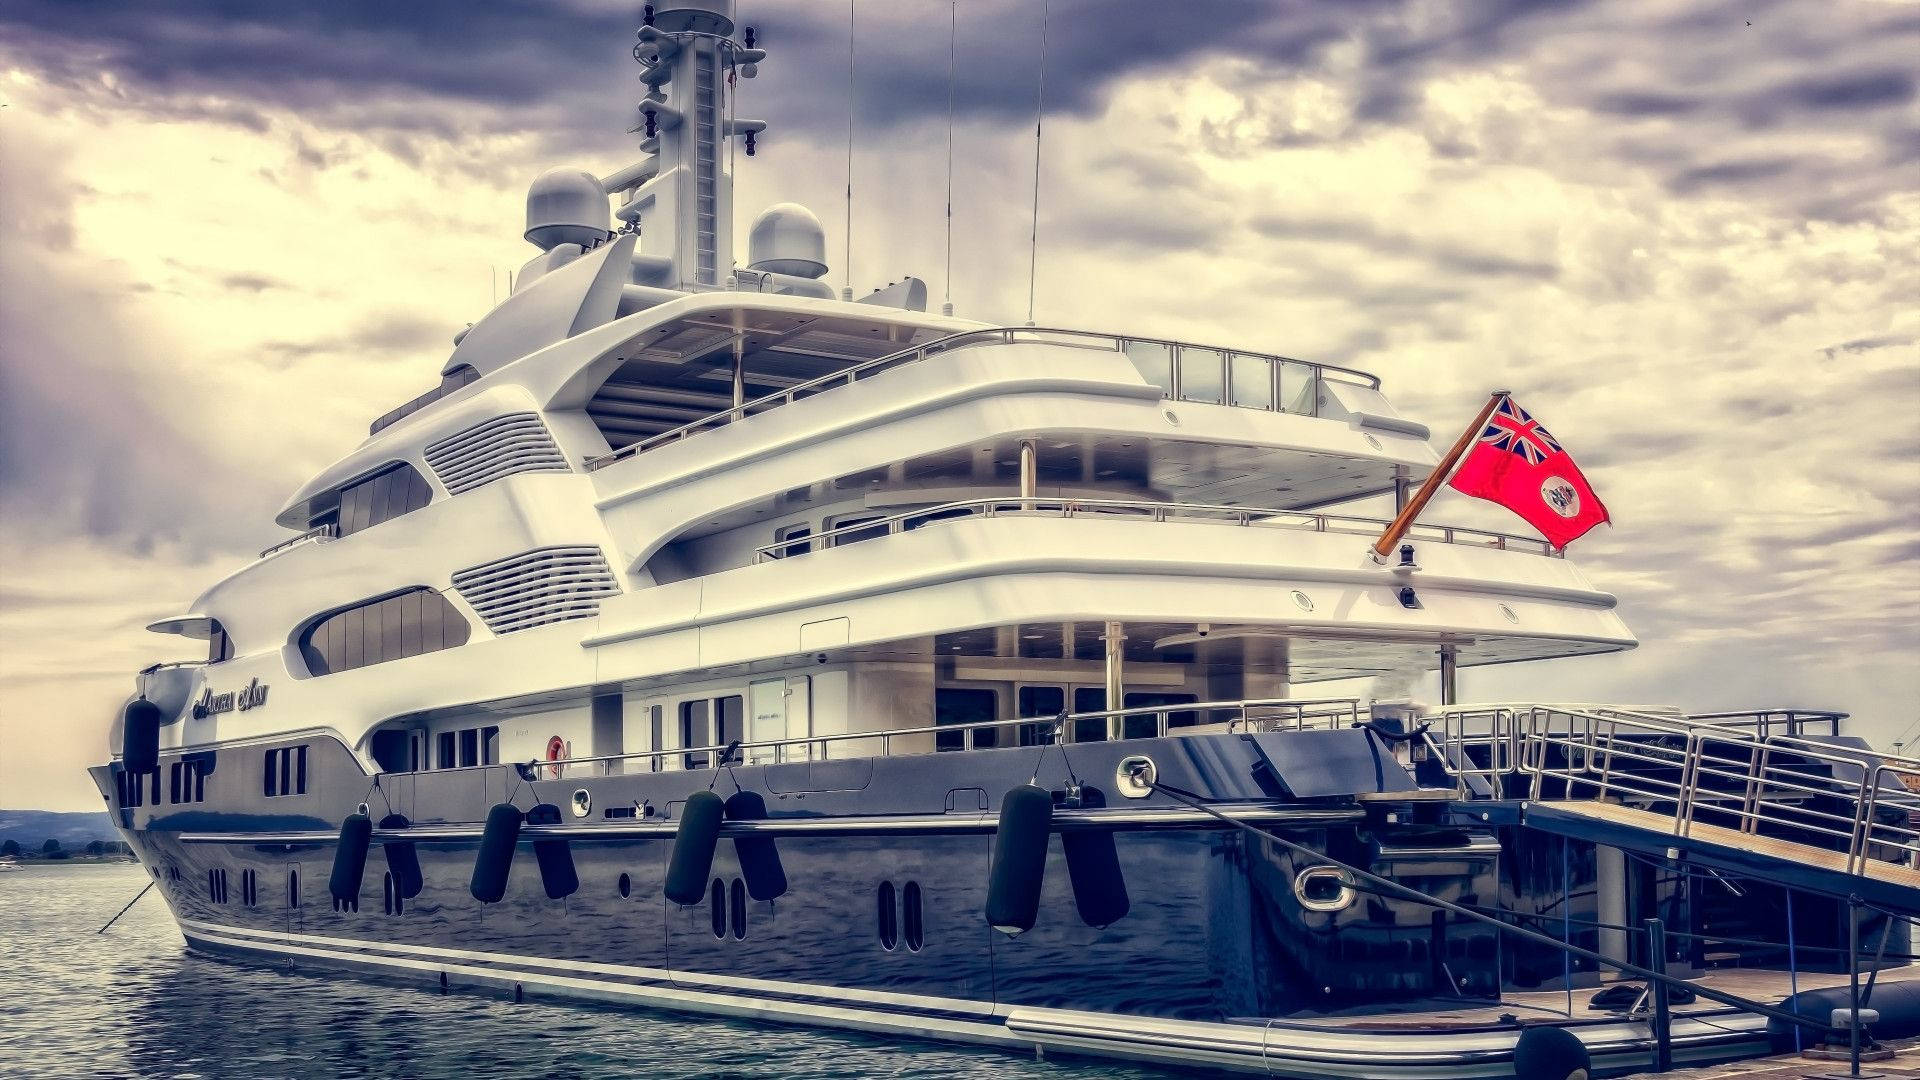 Luxurious Yacht Draped with Red Ensign Wallpaper